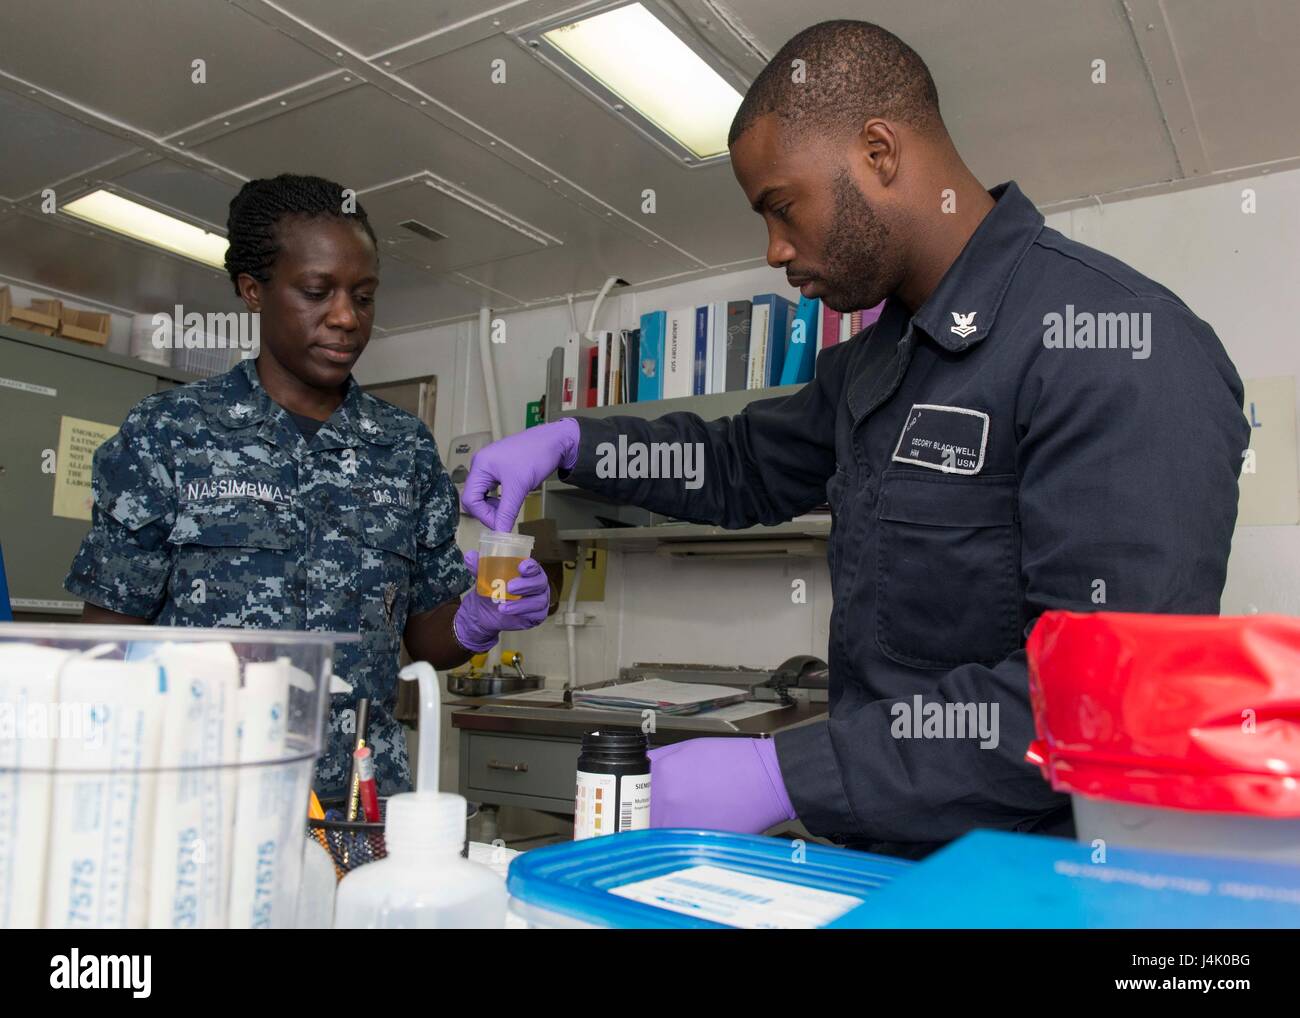 SAN DIEGO (Sept. 30, 2016) Petty Officer 2nd Class Barbara Nassimbwa (left) and Petty Officer 2nd Class Decory Blackwell work together to process medical samples aboard amphibious assault ship USS Boxer (LHD 4). Boxer returned to its homeport, San Diego, September 12, following a seven-month deployment to the 3rd, 5th, and 7th Fleet areas of operation. (U.S. Navy photo by Petty Officer 3rd Class Jesse Monford/Released) Stock Photo